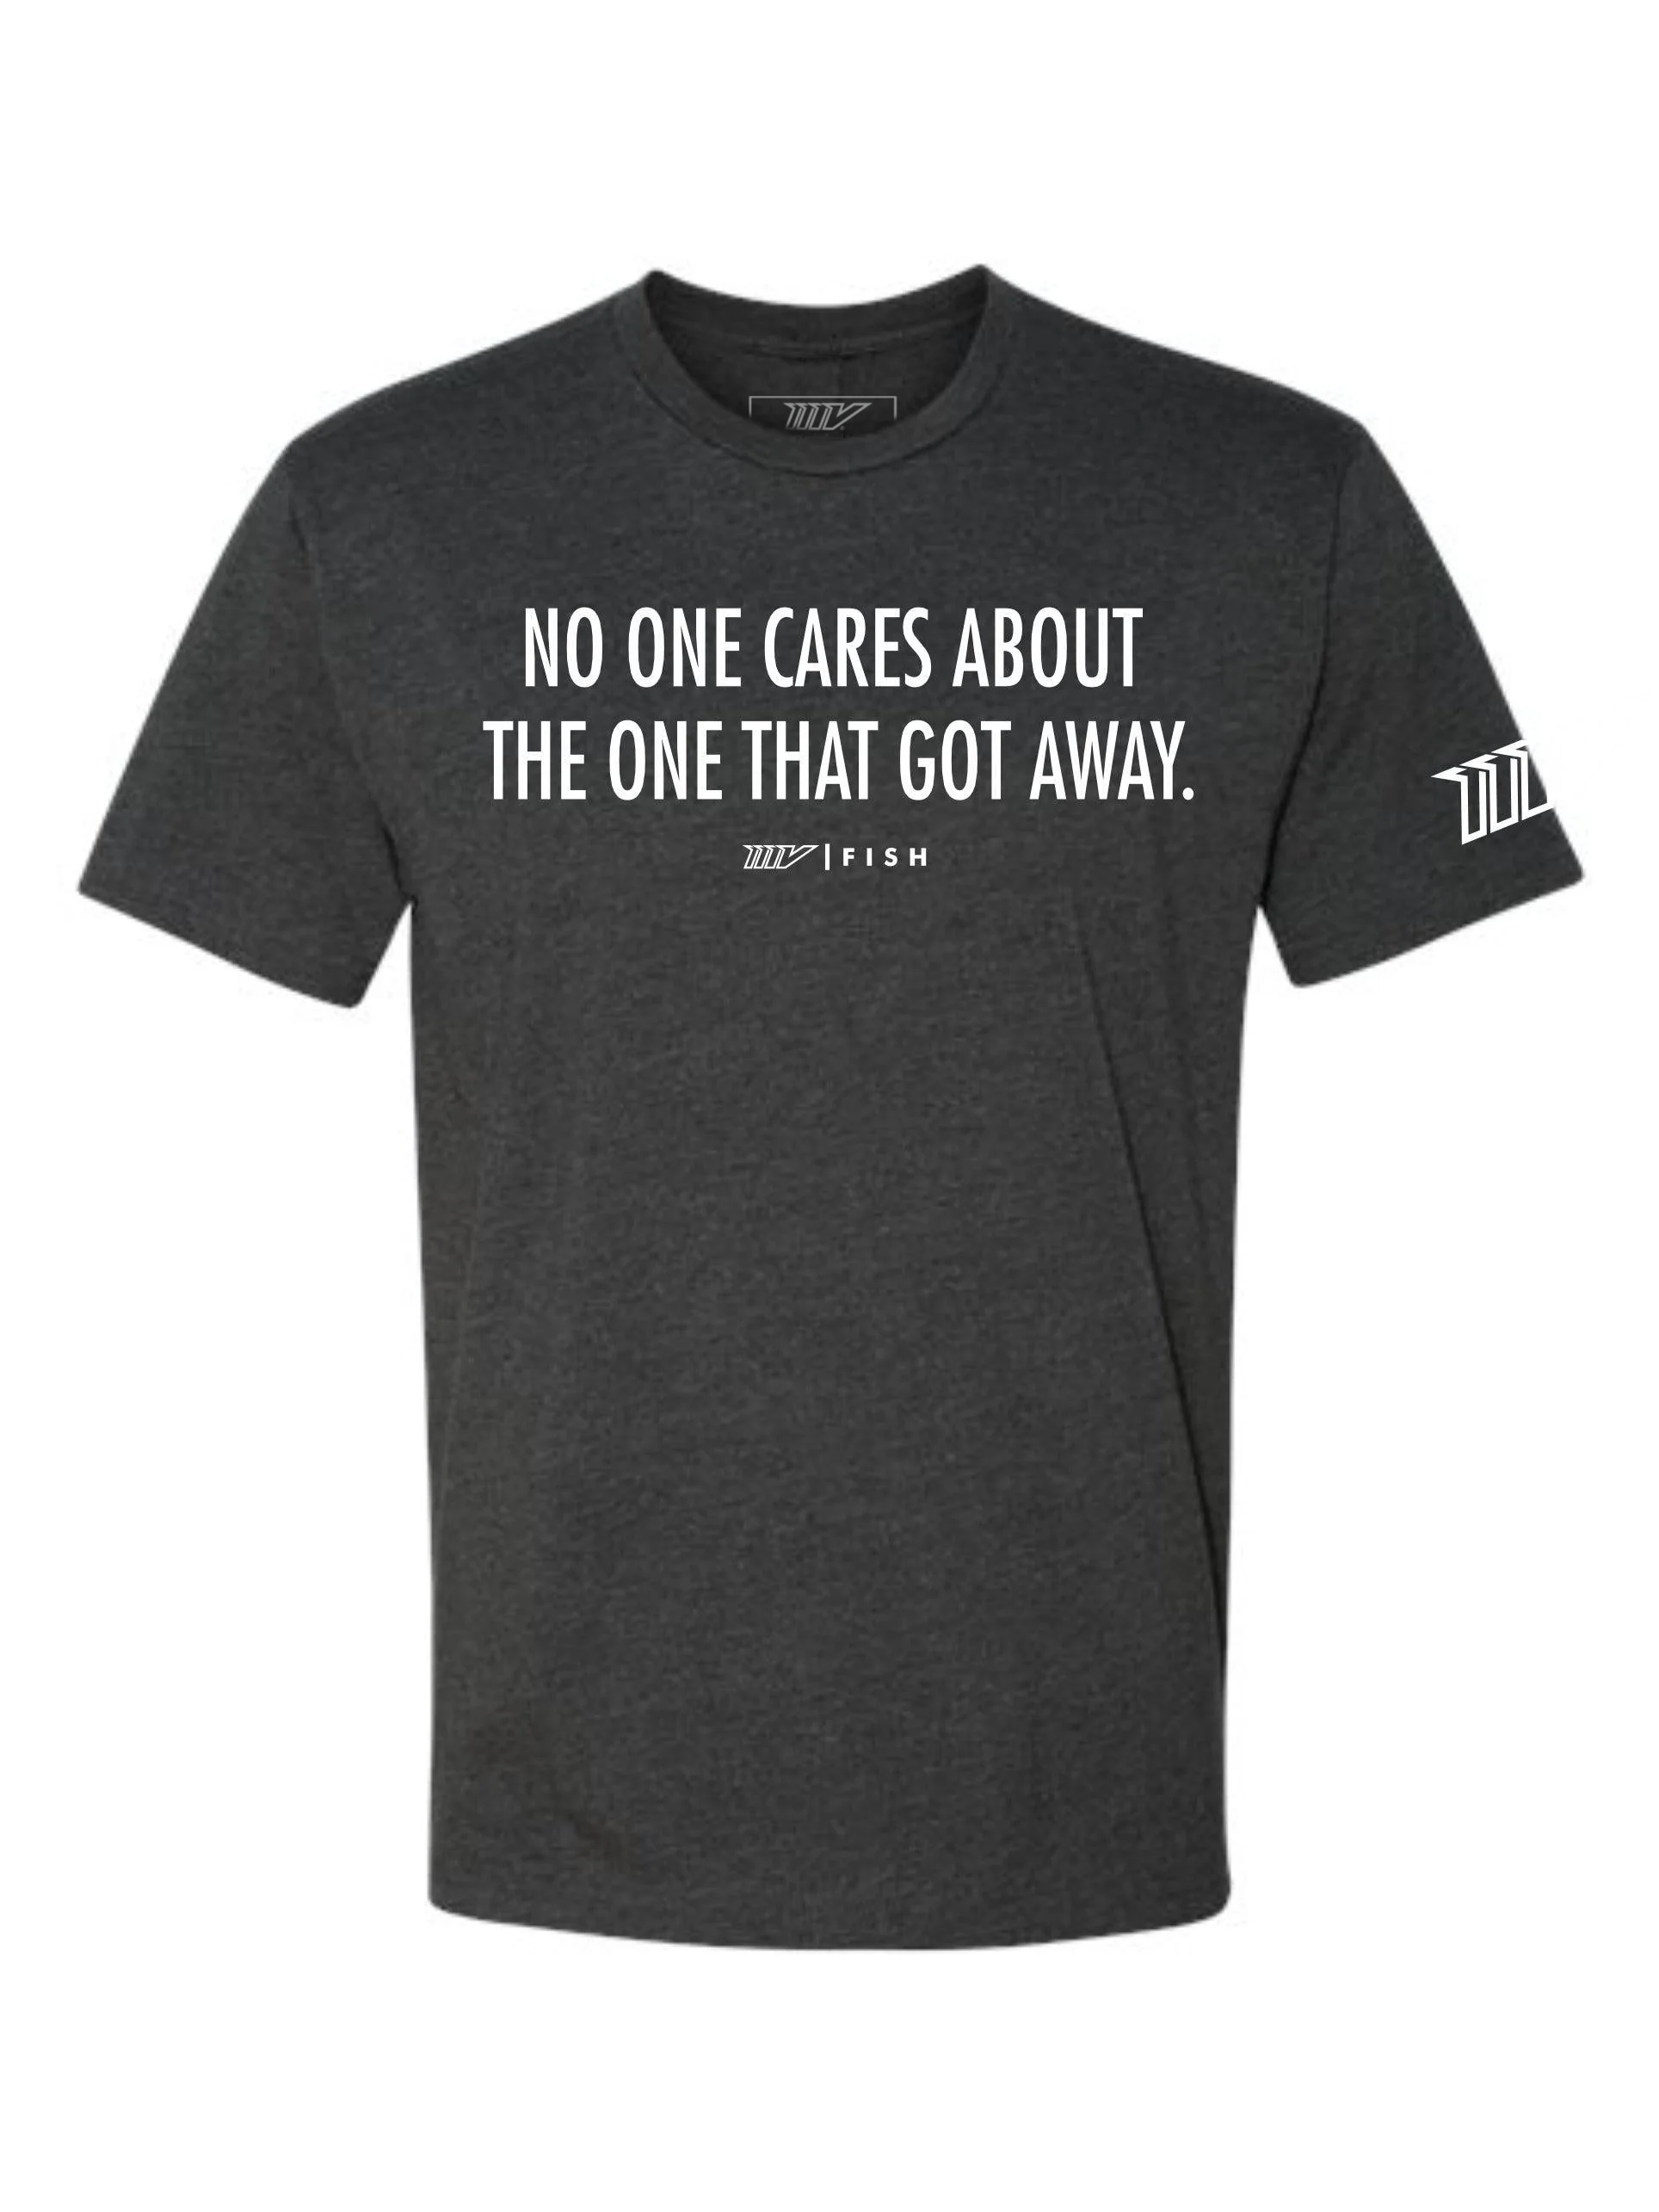 The One That Got Away Tee